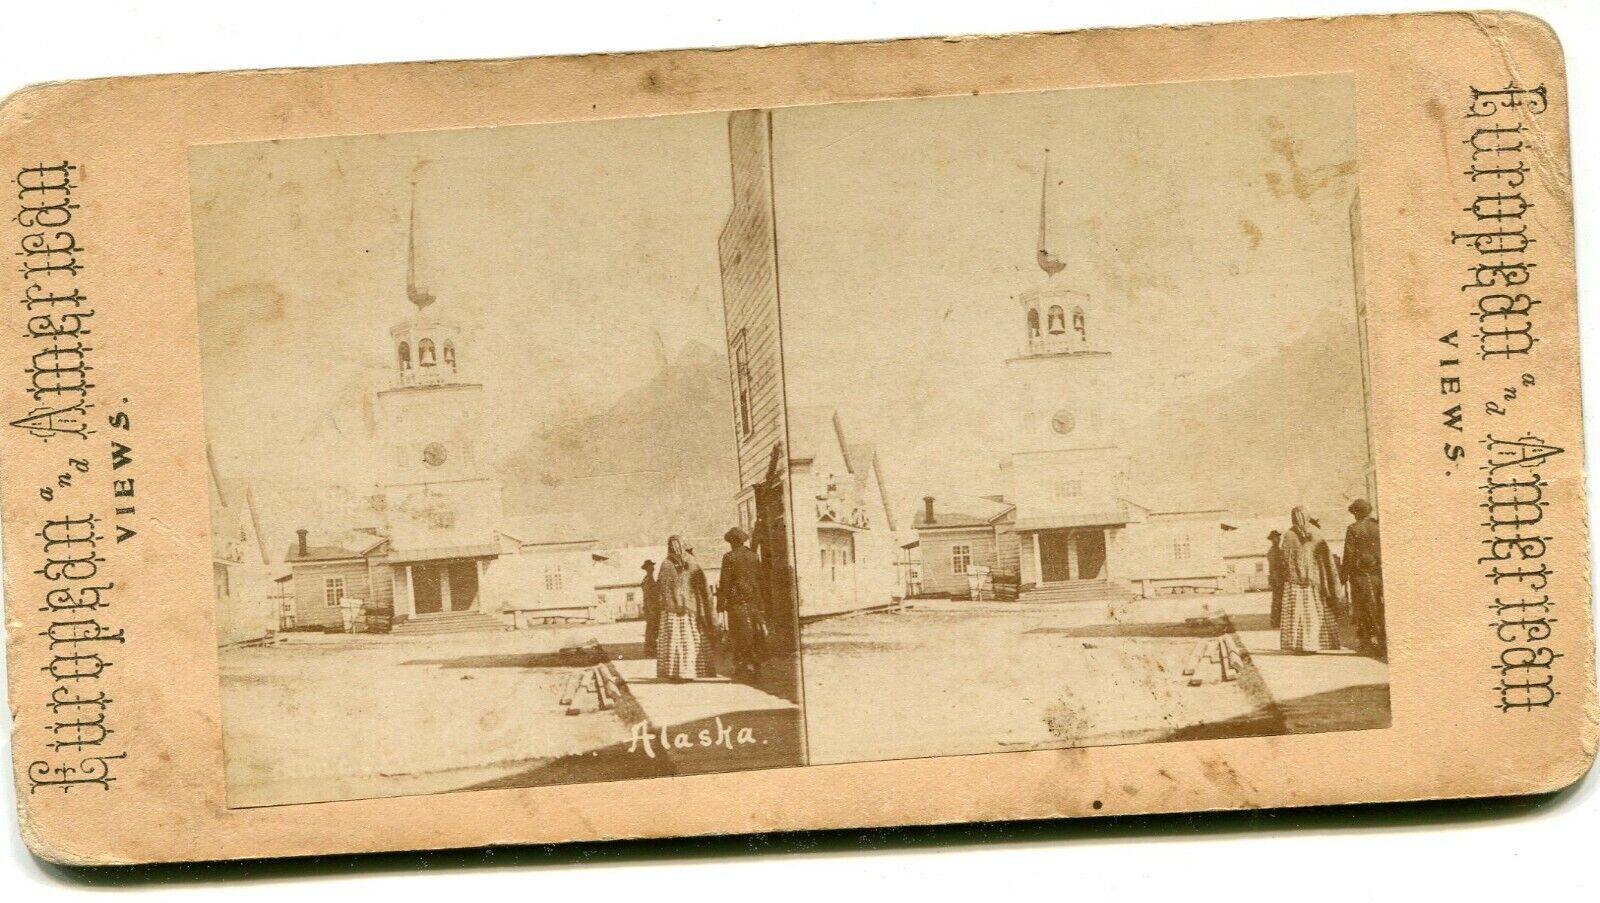 EARLY STEREO VIEW CHURCH IN ALASKA